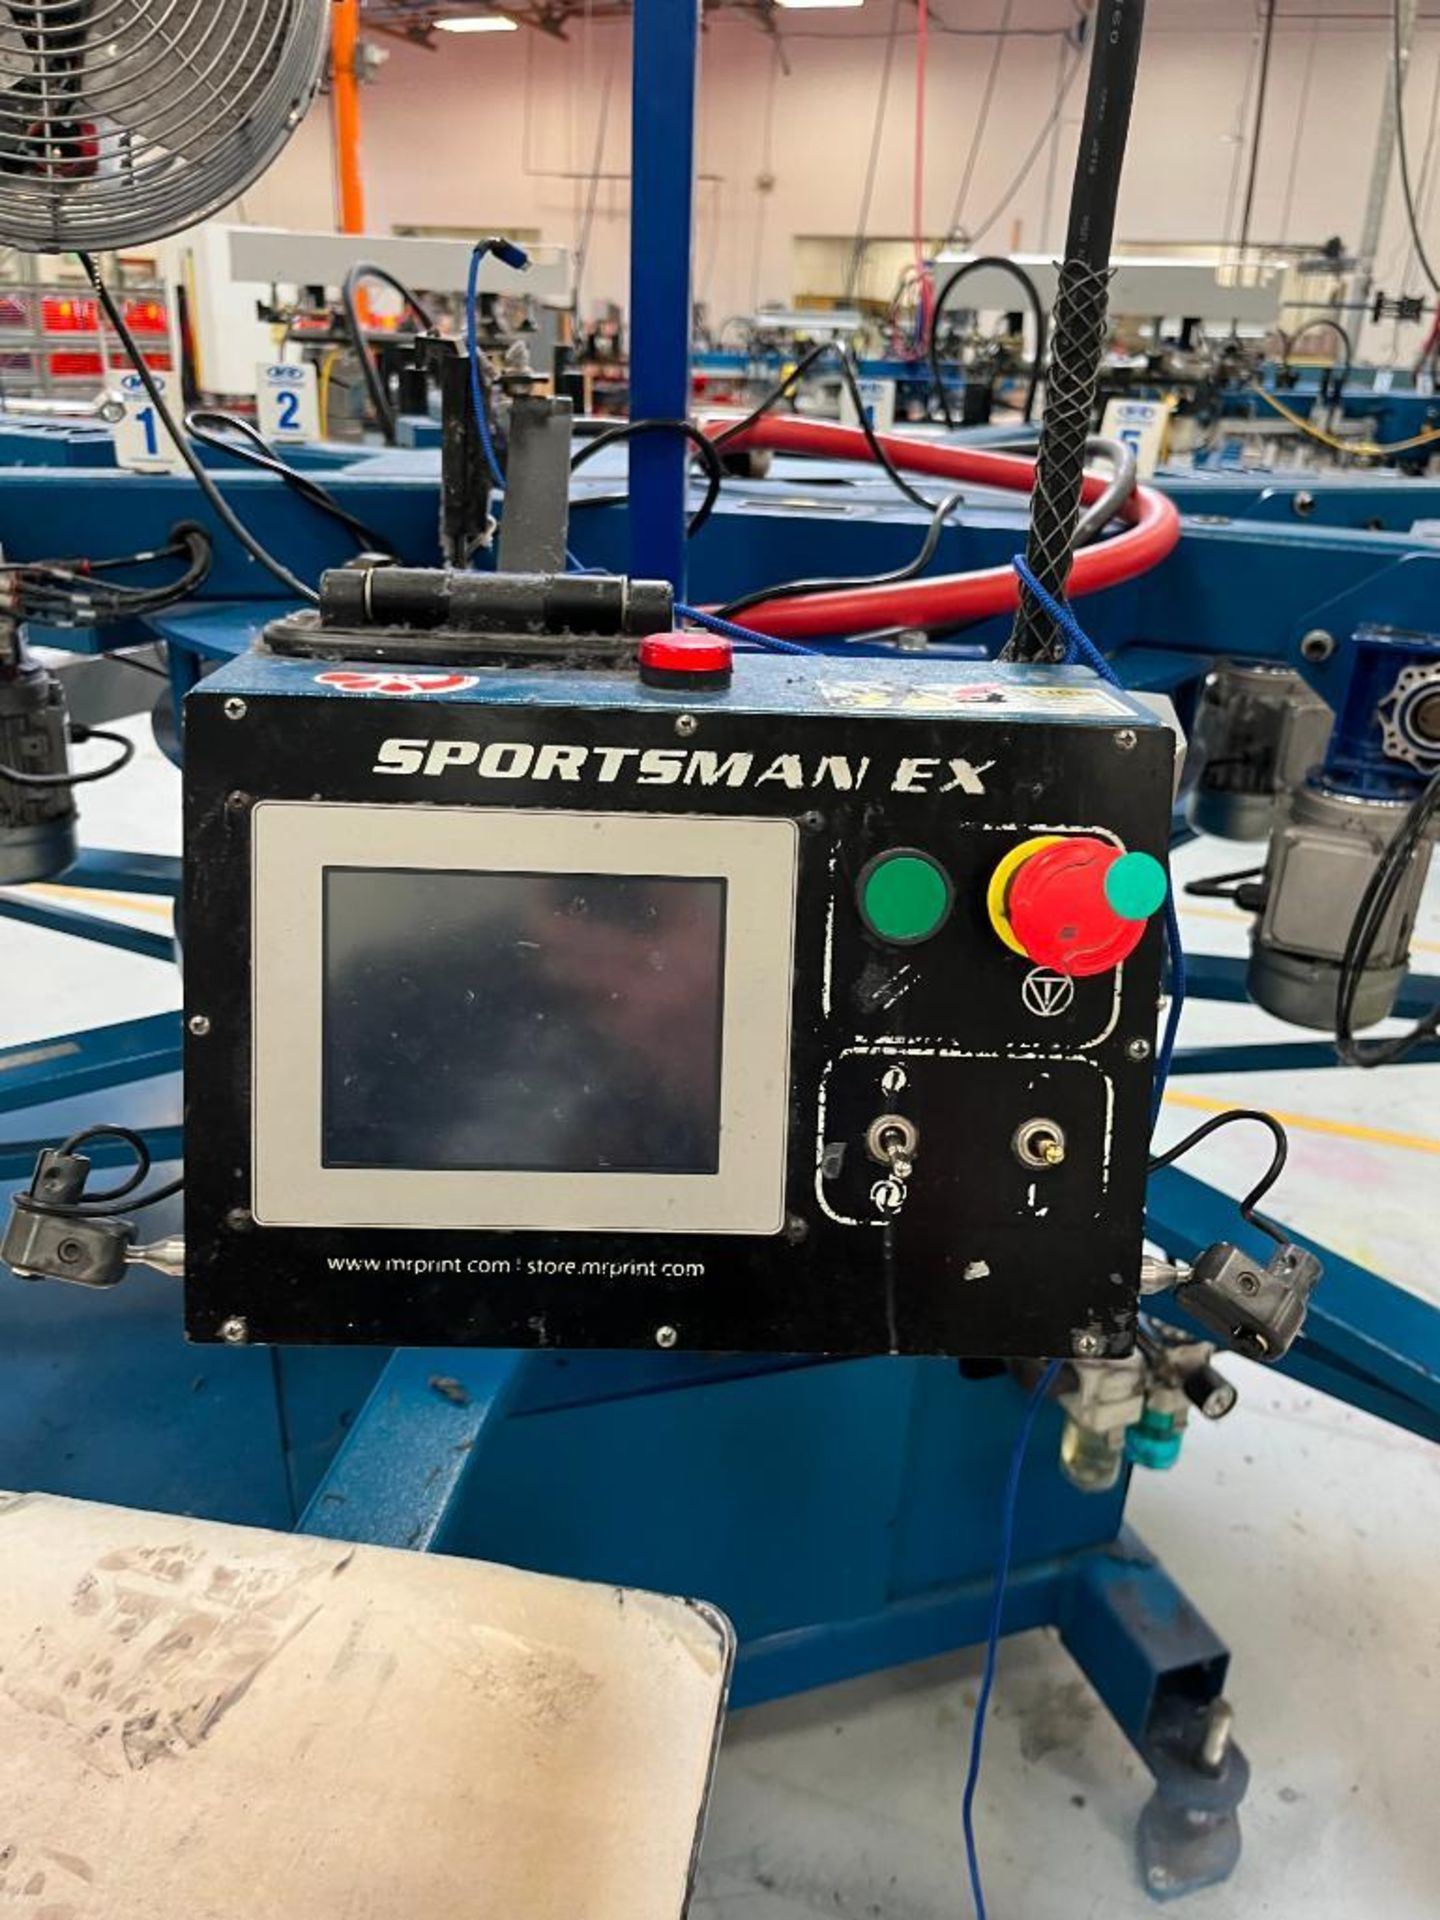 2018 M&R Sportsman EX Automated Screen Printing Machine, 230V, 3-PH, Model SPAX161808062036A, S/N 37 - Image 4 of 5